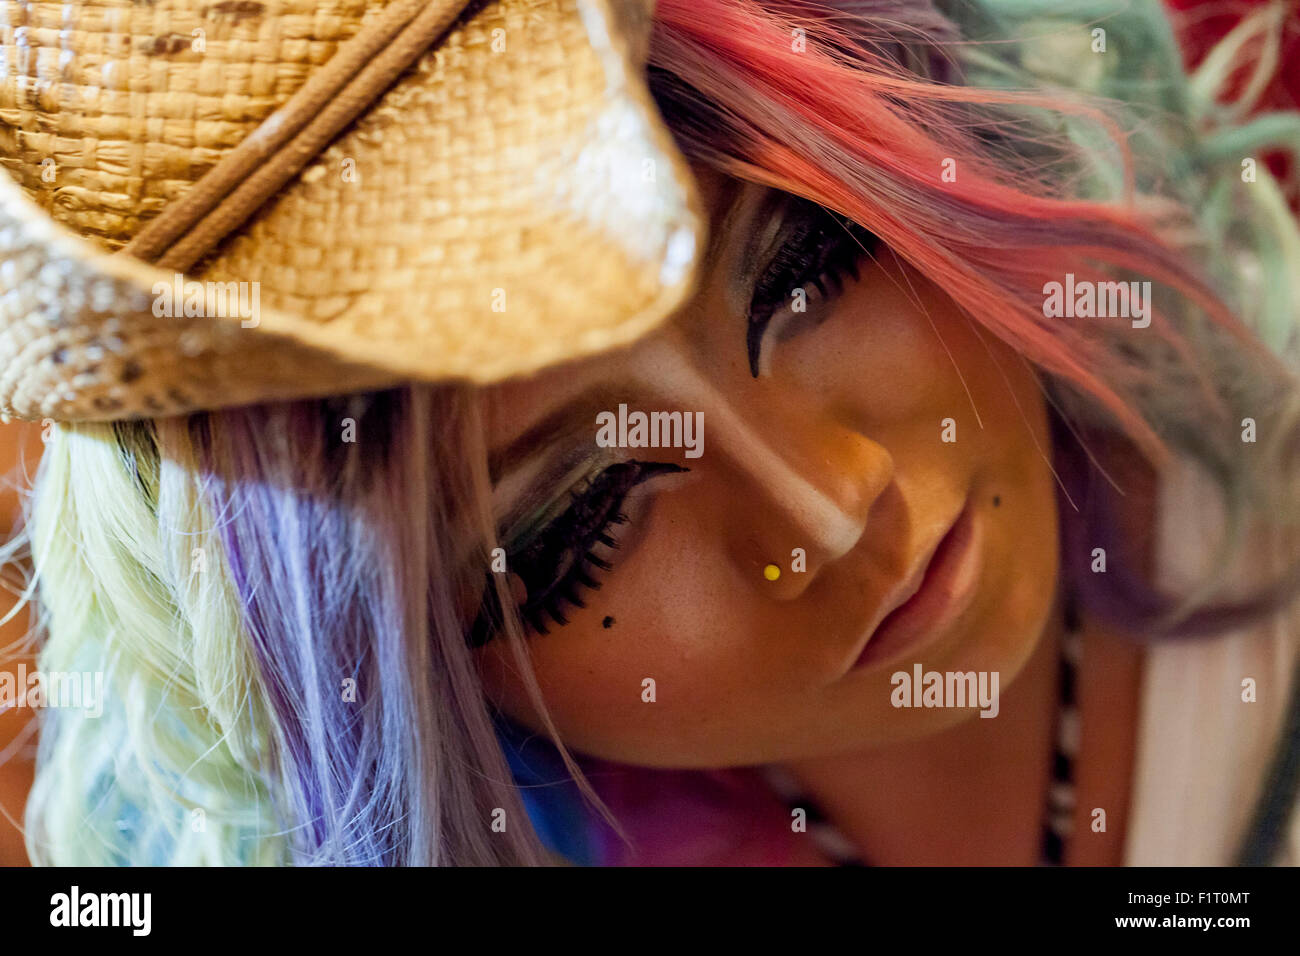 Erimokkori, a member of staff, poses for a picture at the Ganguro Cafe & Bar in the Shibuya shopping area on September 4, 2015. Ganguro is an alternative Japanese fashion trend which started in the mid-1990s where young women, rebelling against the traditional idea of Japanese beauty, wore colorful make-up and clothes and had dark-skin. 10 Ganguro fashion girls work in the new bar, which offers original Ganguro Balls (fried takoyaki style sausage balls in black squid ink batter) on its menu. Ganguro Café & Bar also offers special services such as Ganguro make-up and the chance to take purik Stock Photo